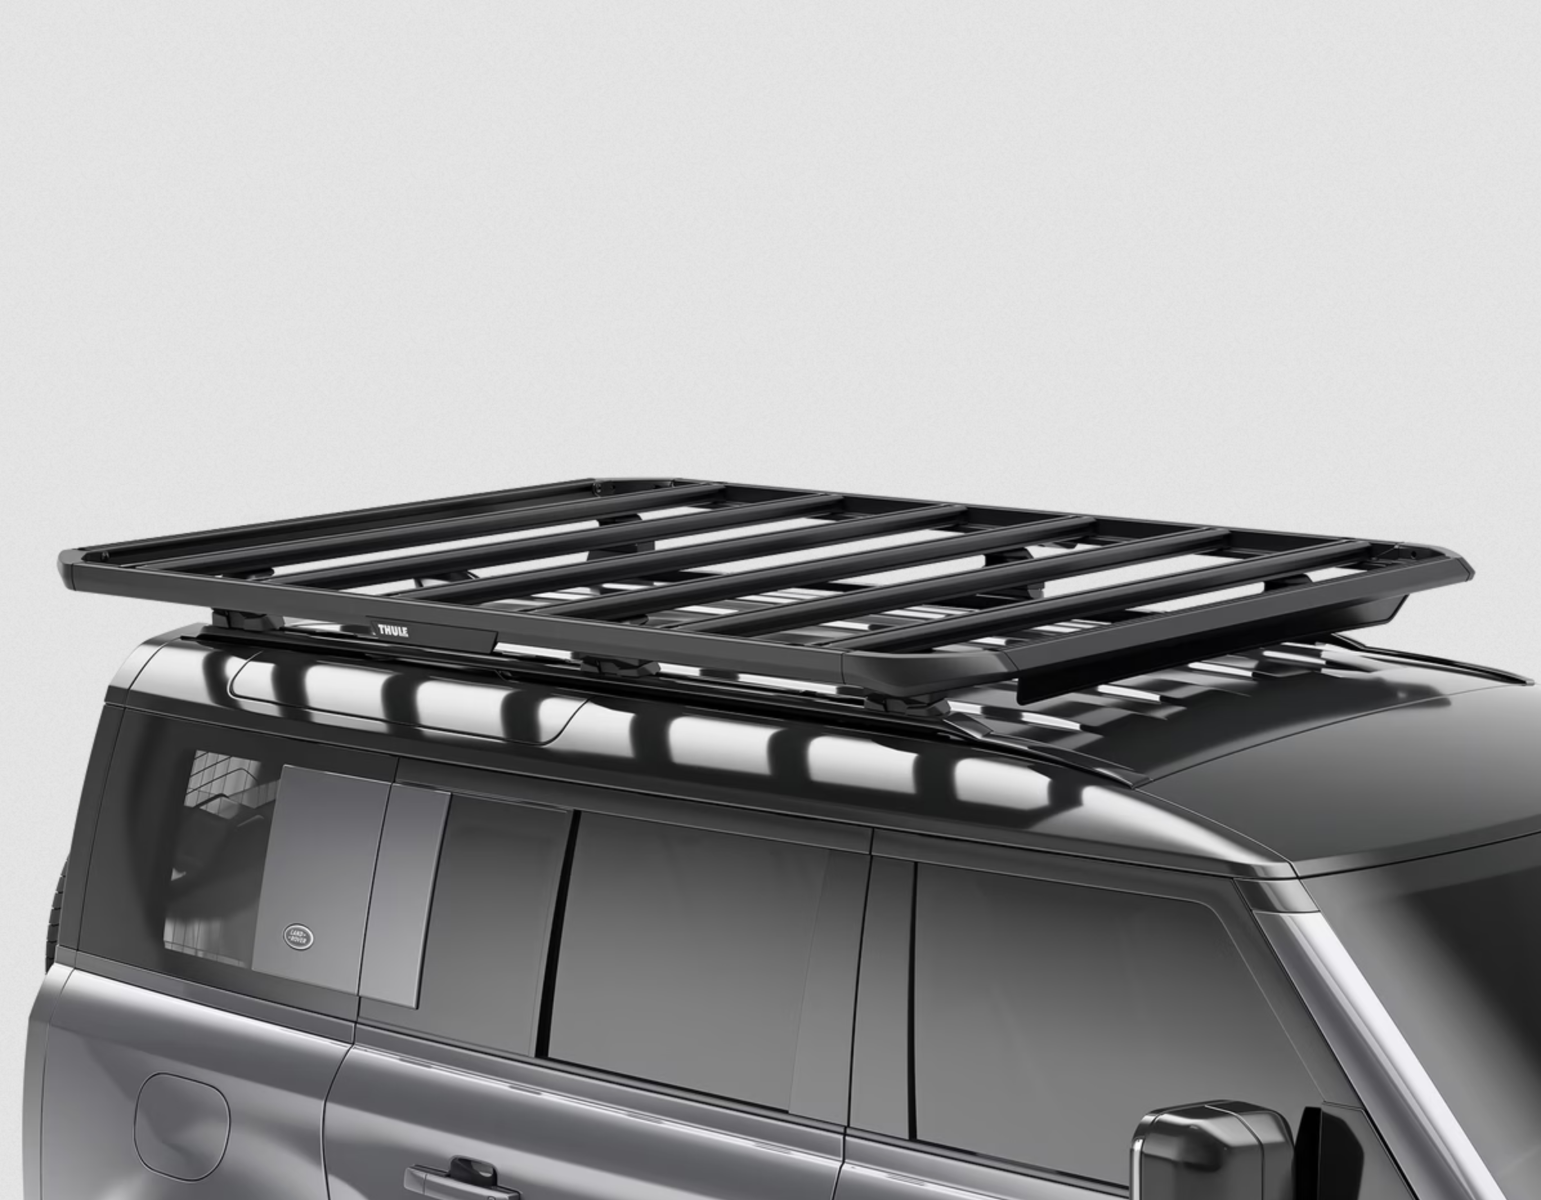 Thule Caprock Platform (1900 x 1500mm) for Fiat Freemont 5dr SUV with Raised Roof Rail (2013 to 2018) - Raised Rail Mount